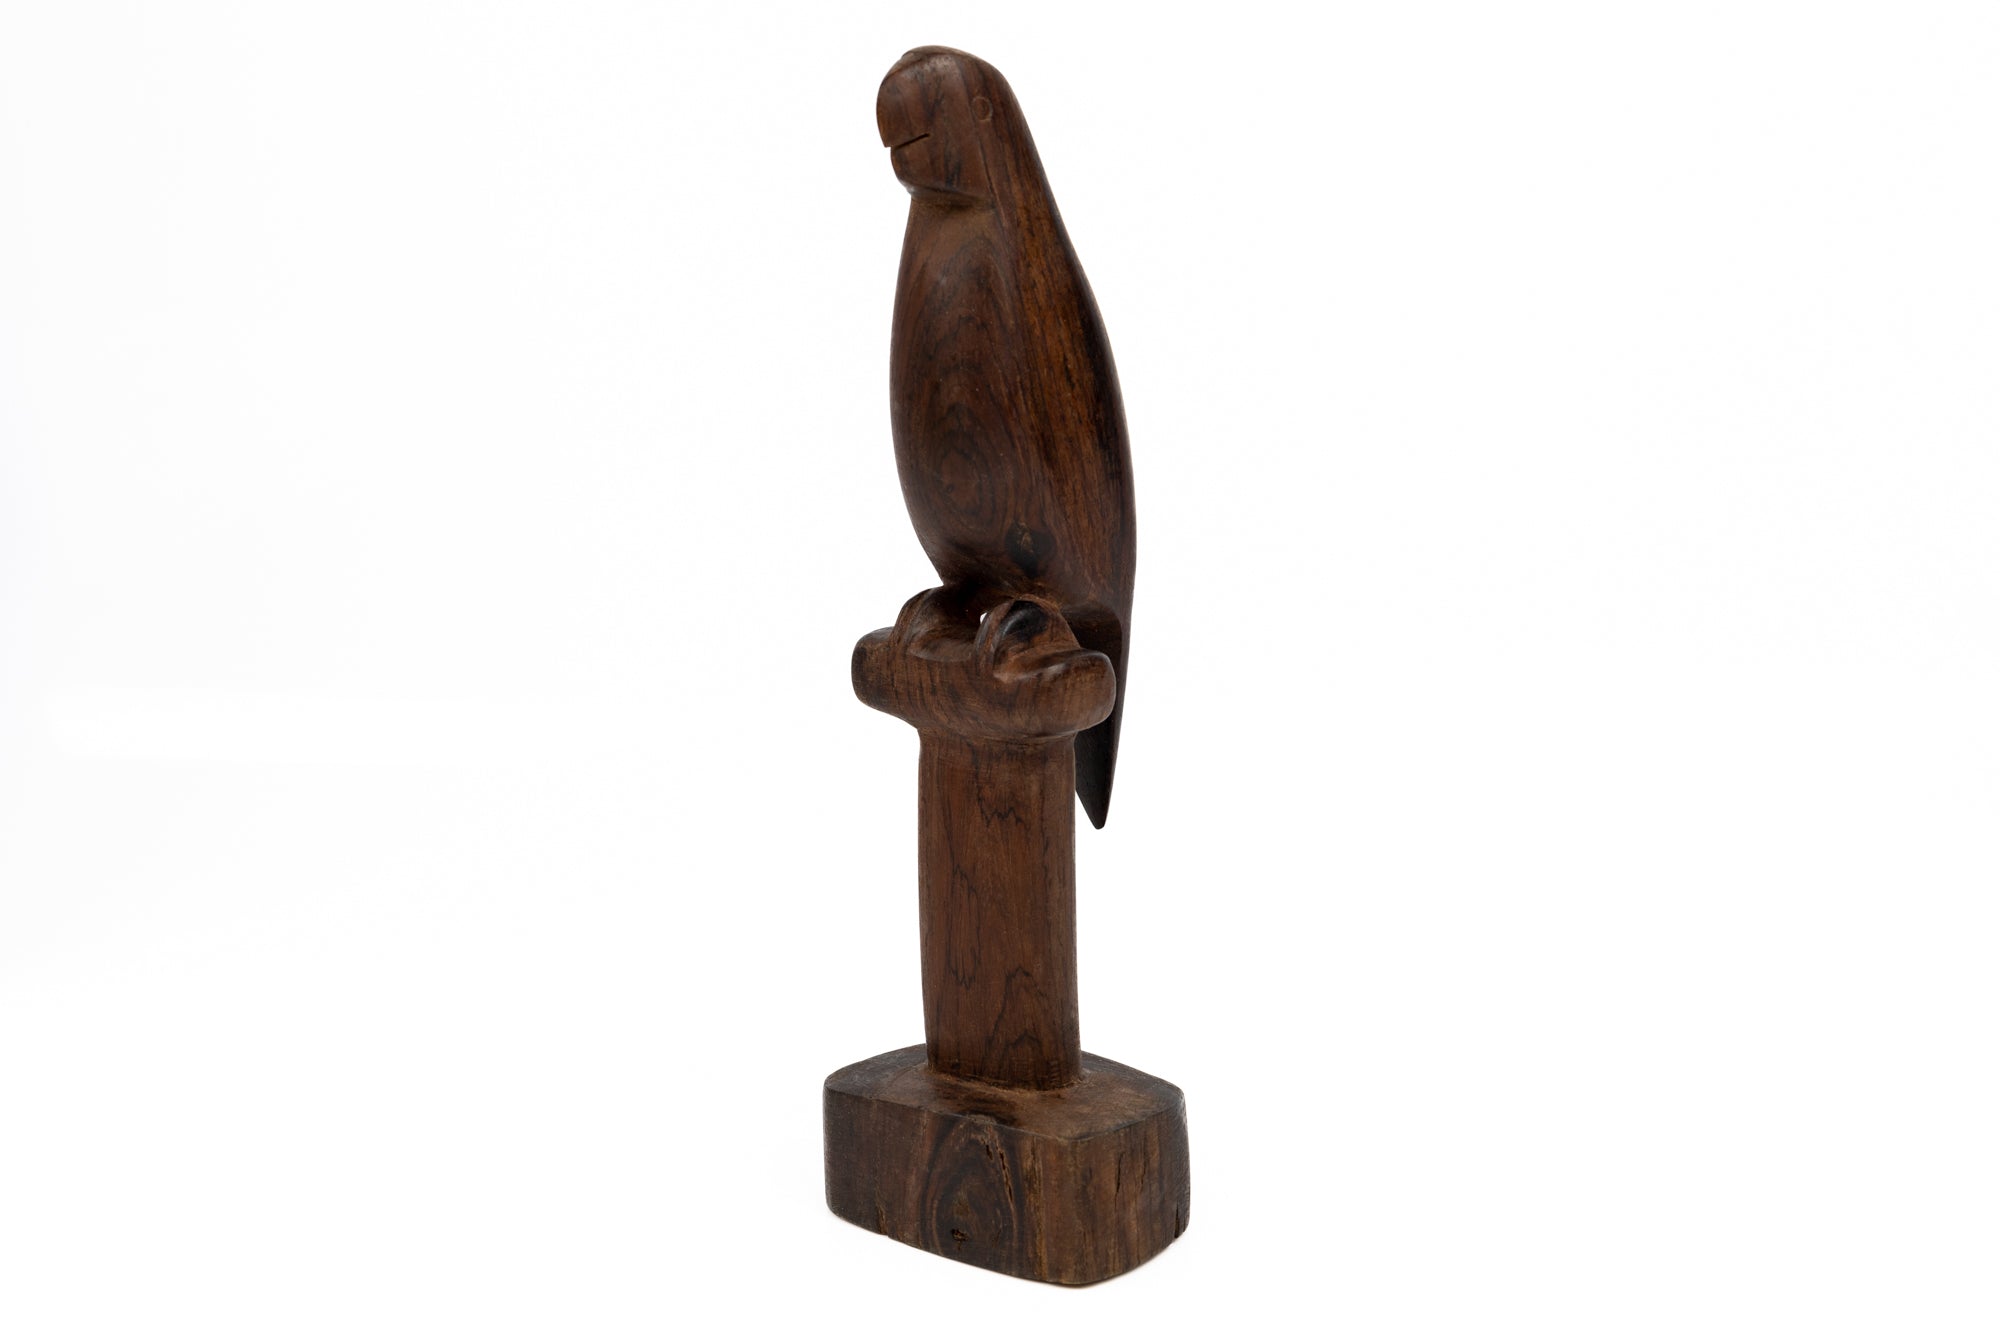 Jungle Parrot Figurine, Wood Carving